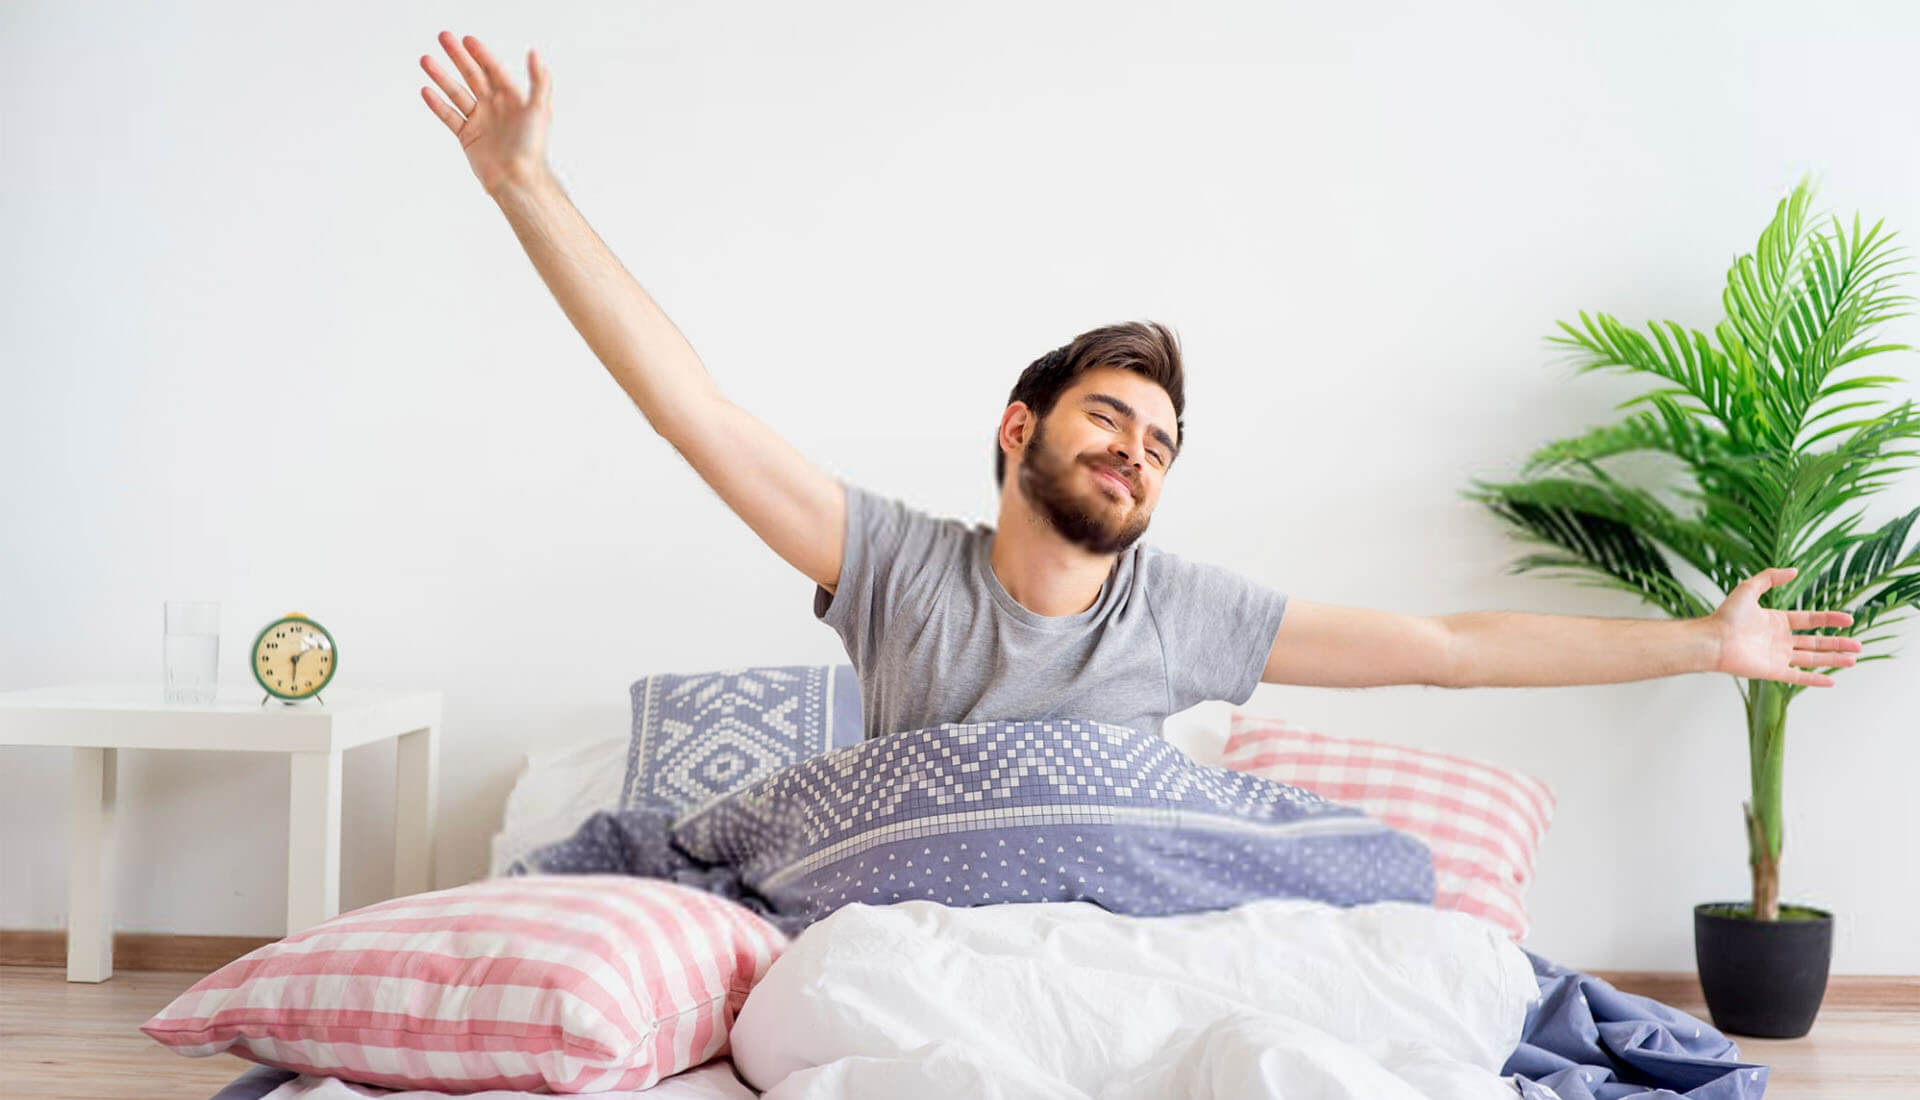 Young man happily stretching while getting up in the morning in bed